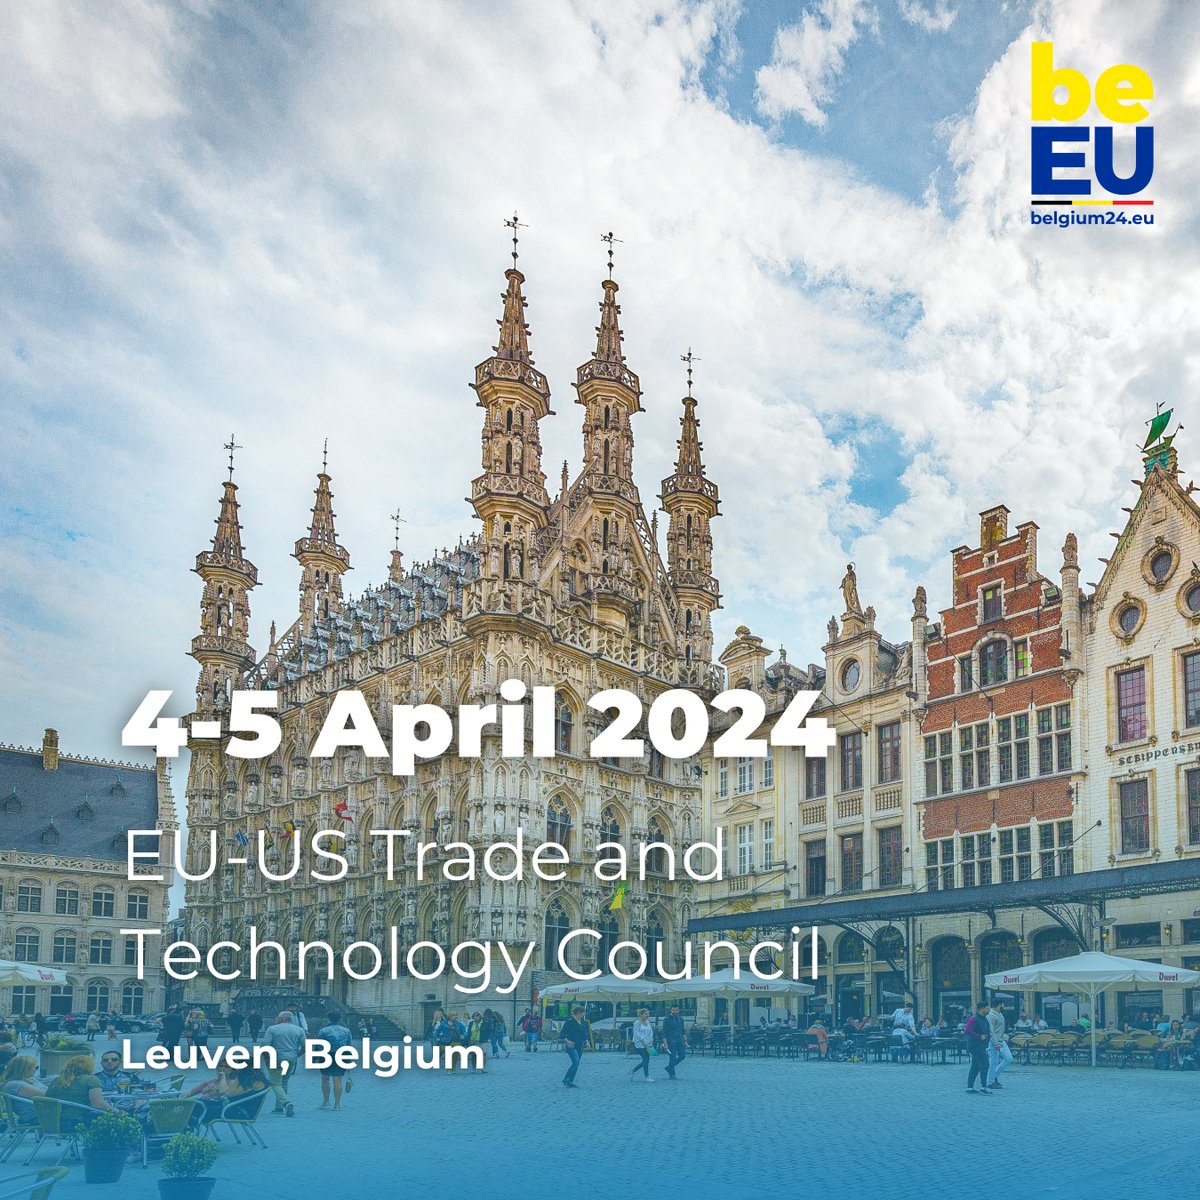 🇪🇺🇺🇸 Belgium is honored to host the 6th meeting of the EU-US Trade and Technology Council in the university town of Leuven, where history and innovation meet. Looking forward to welcoming EU and US representatives to further strengthen our economic and trade ties! #TTC6